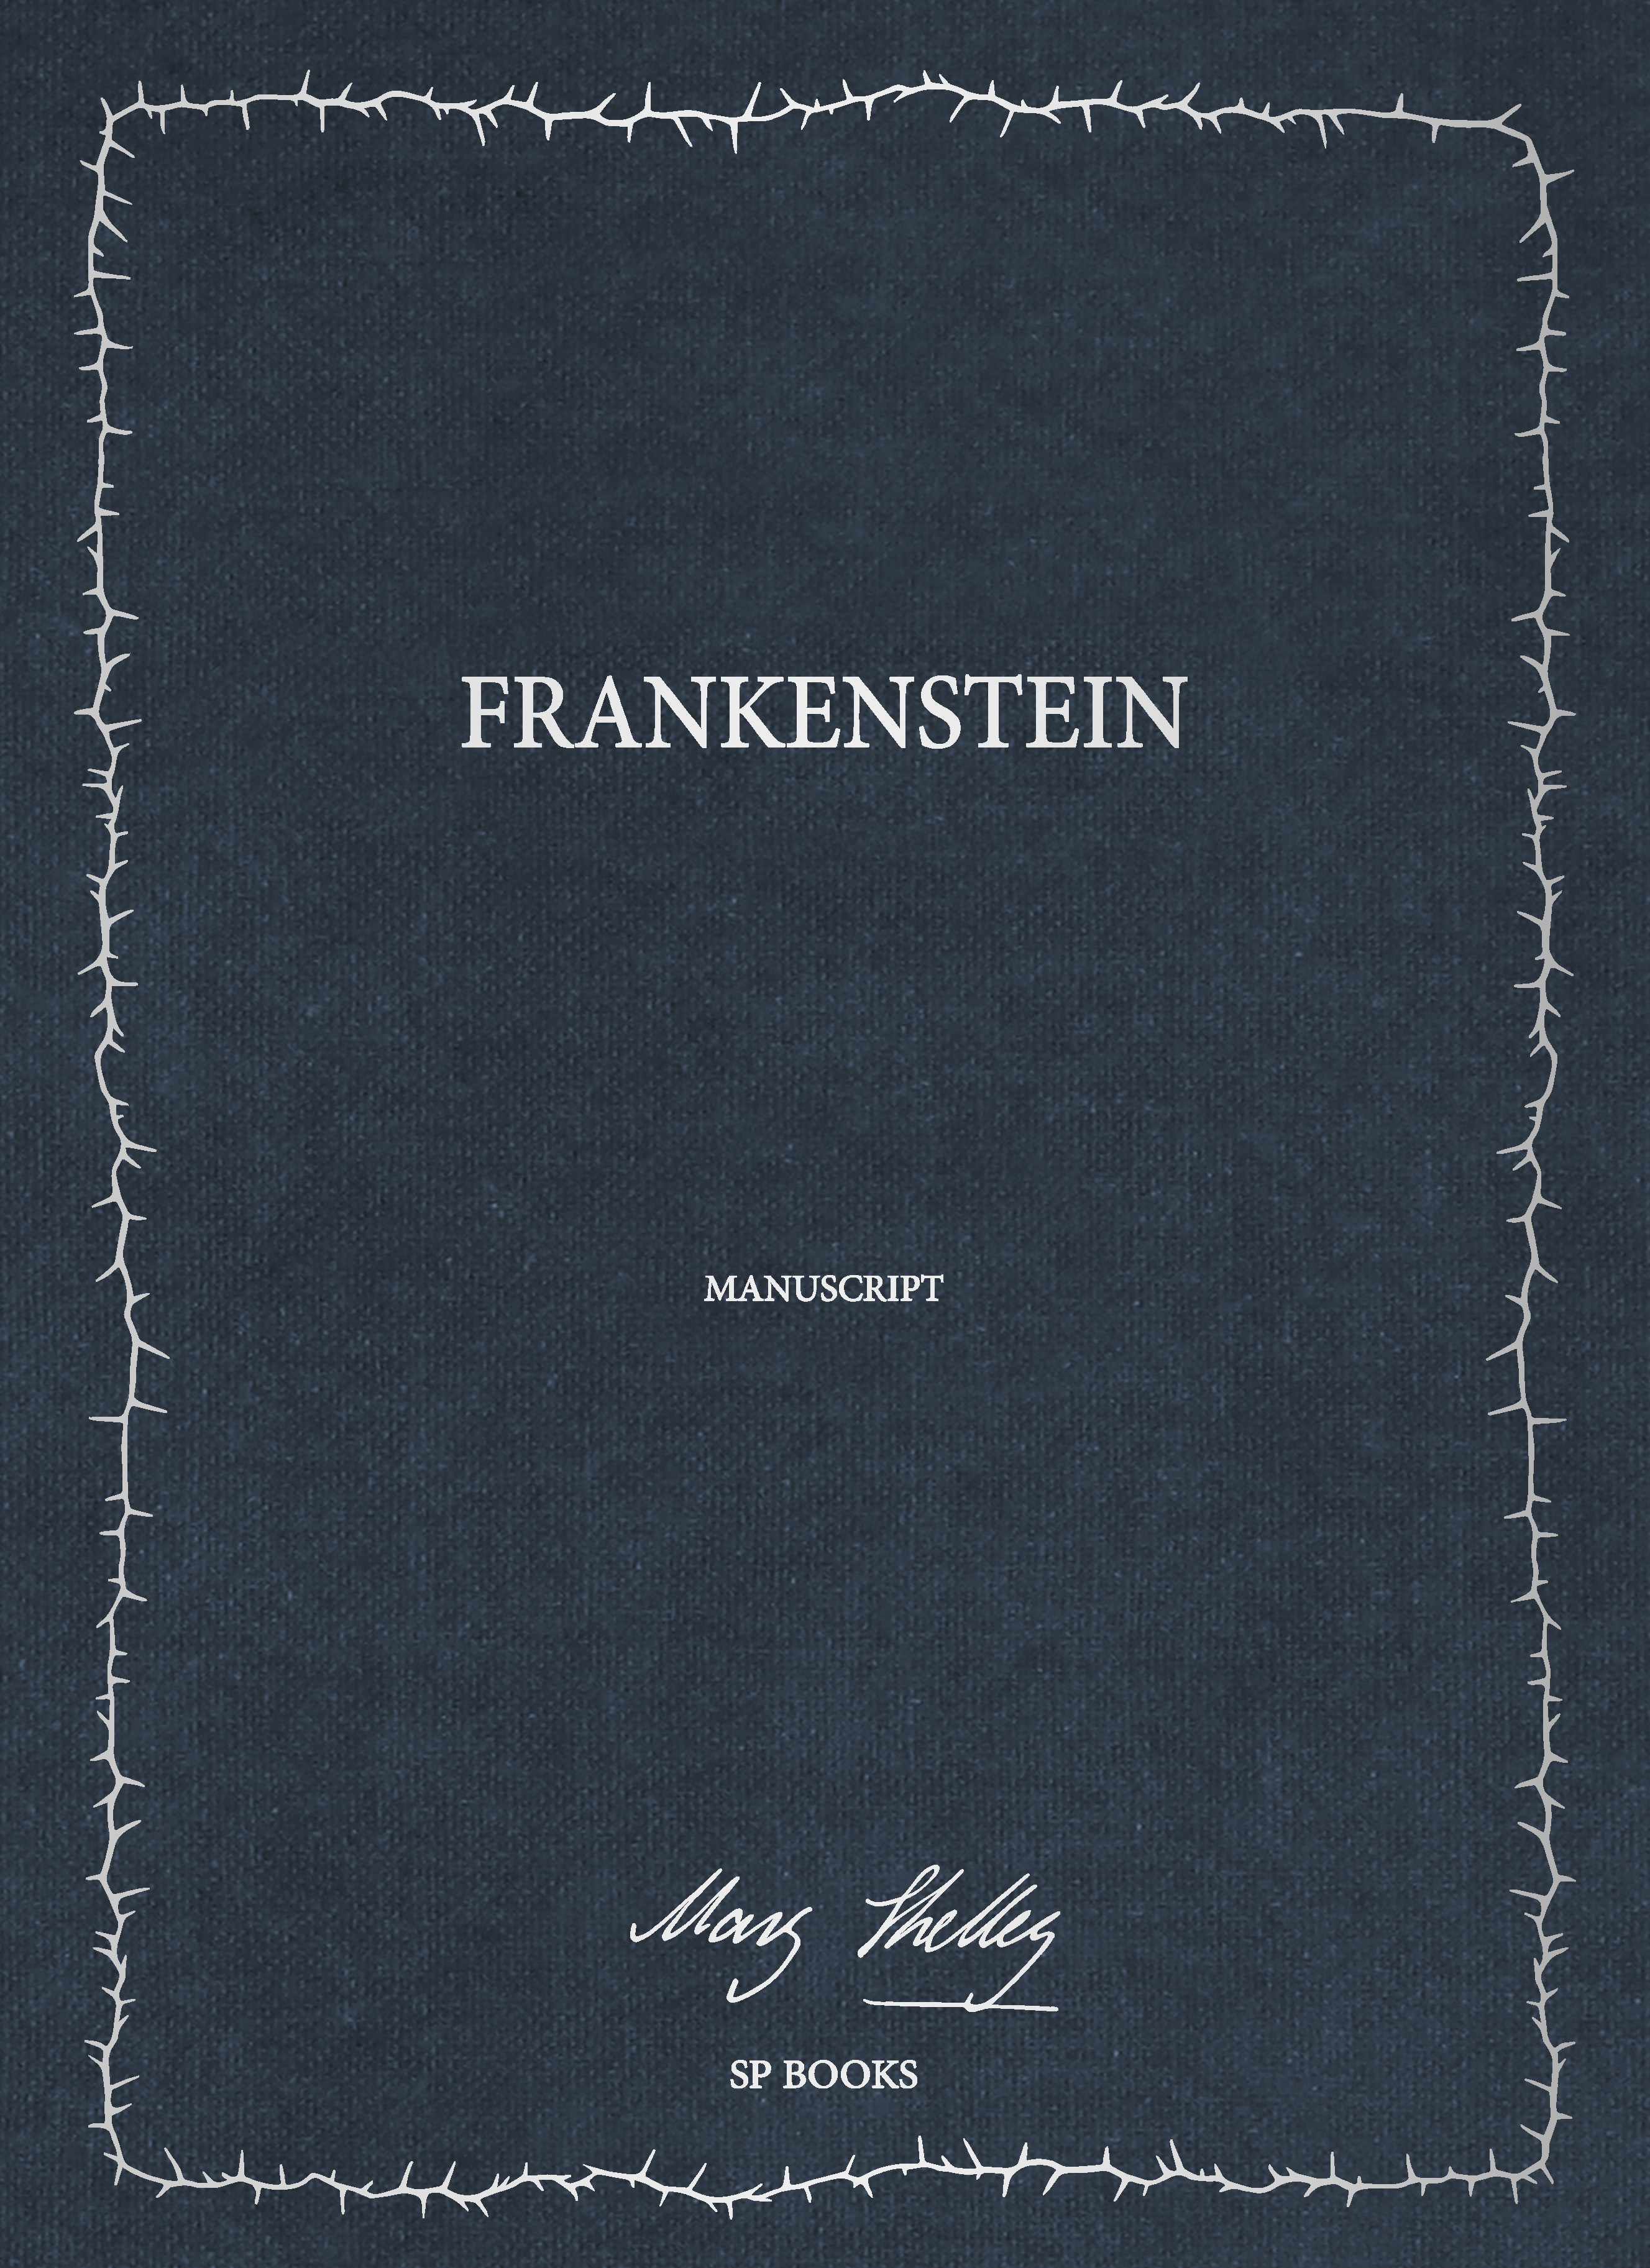 The cover of the newly-released Frankenstein manuscript by Mary Shelley